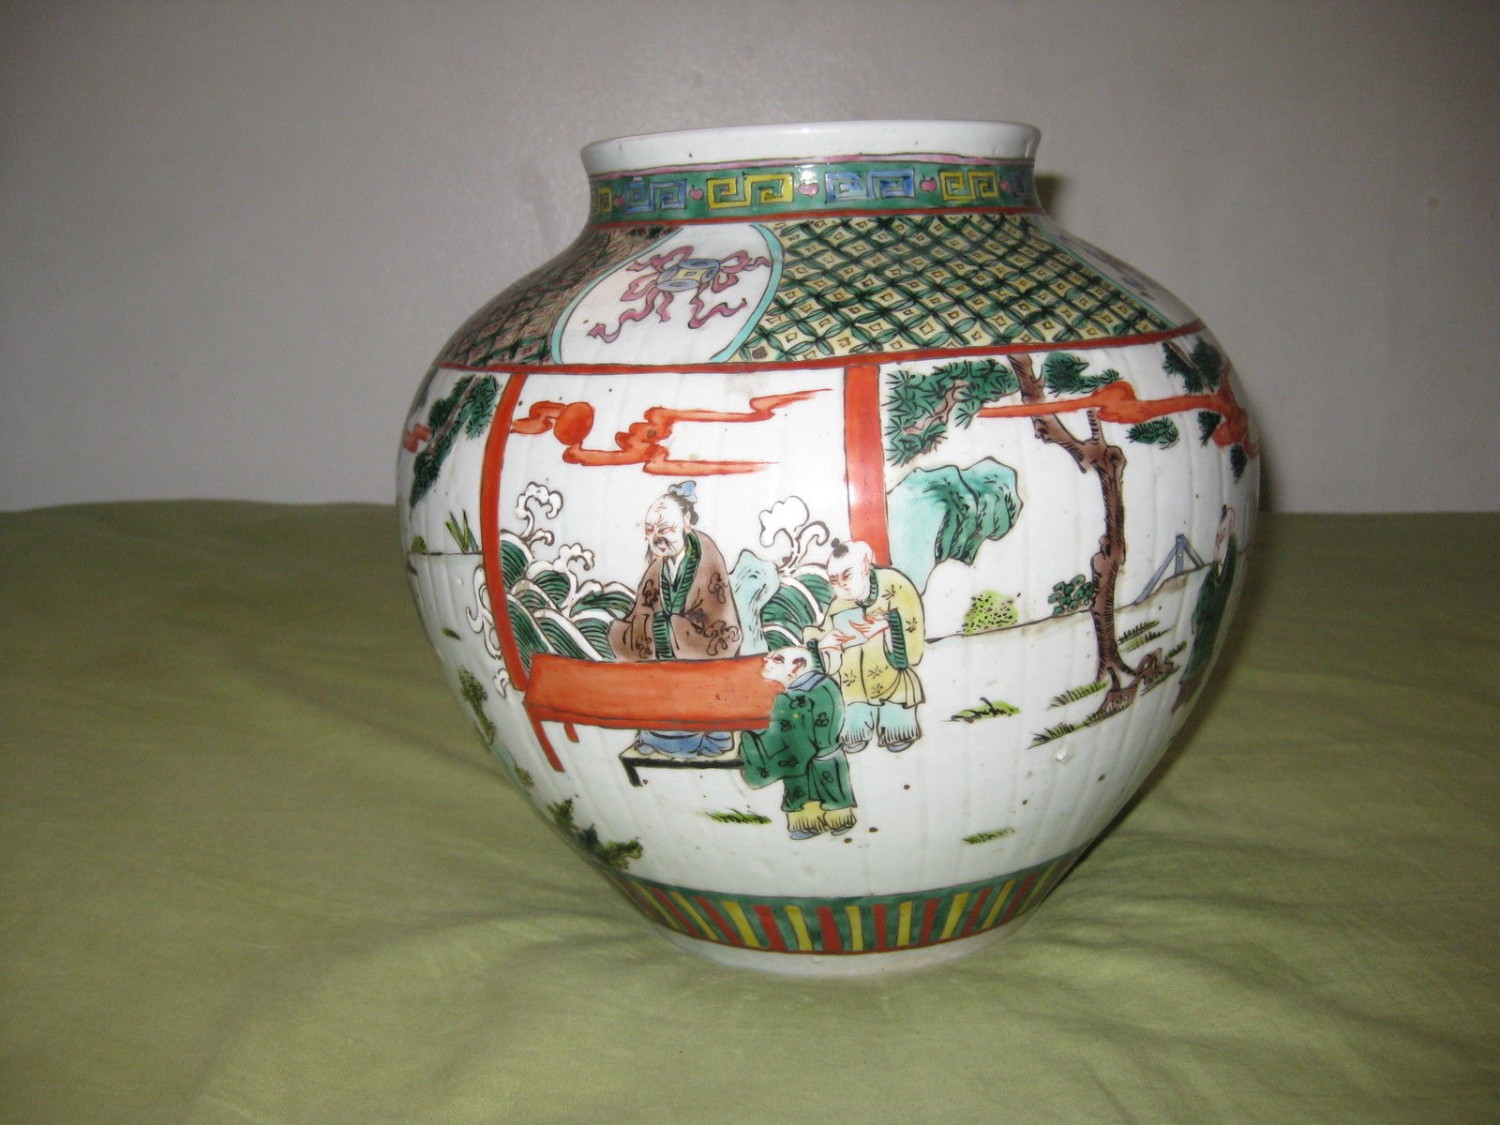 ANTIQUE CHINESE PORCELAIN POT WITH YONGZHENG MARK, 19TH CENTURY.